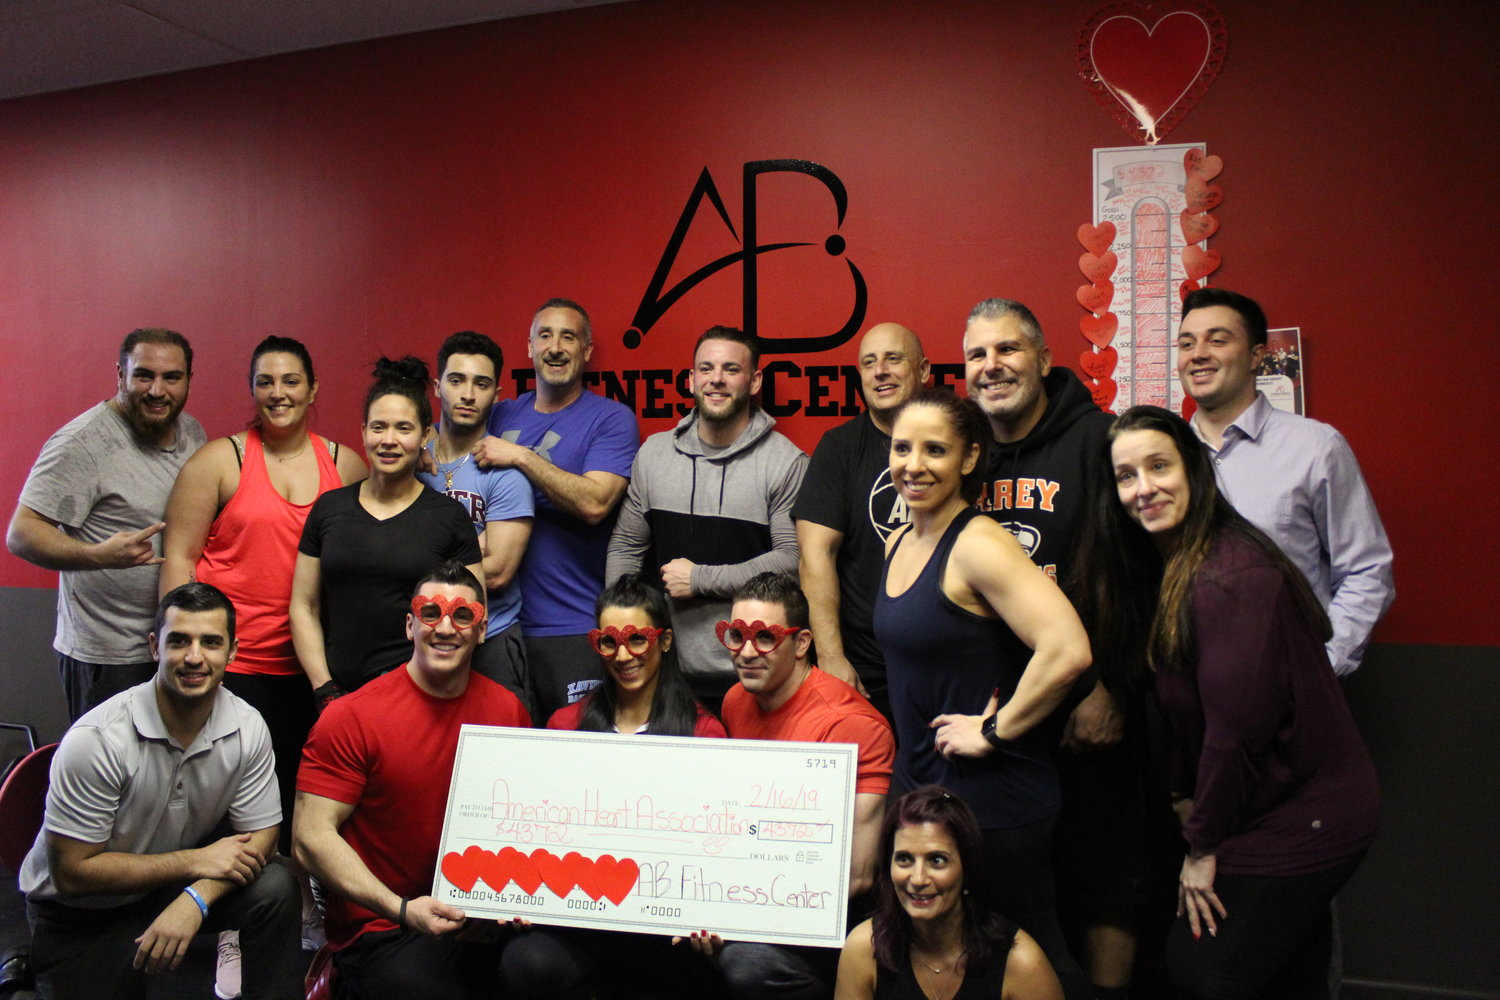 AB Fitness raised $4,372 for the American Heart Association.